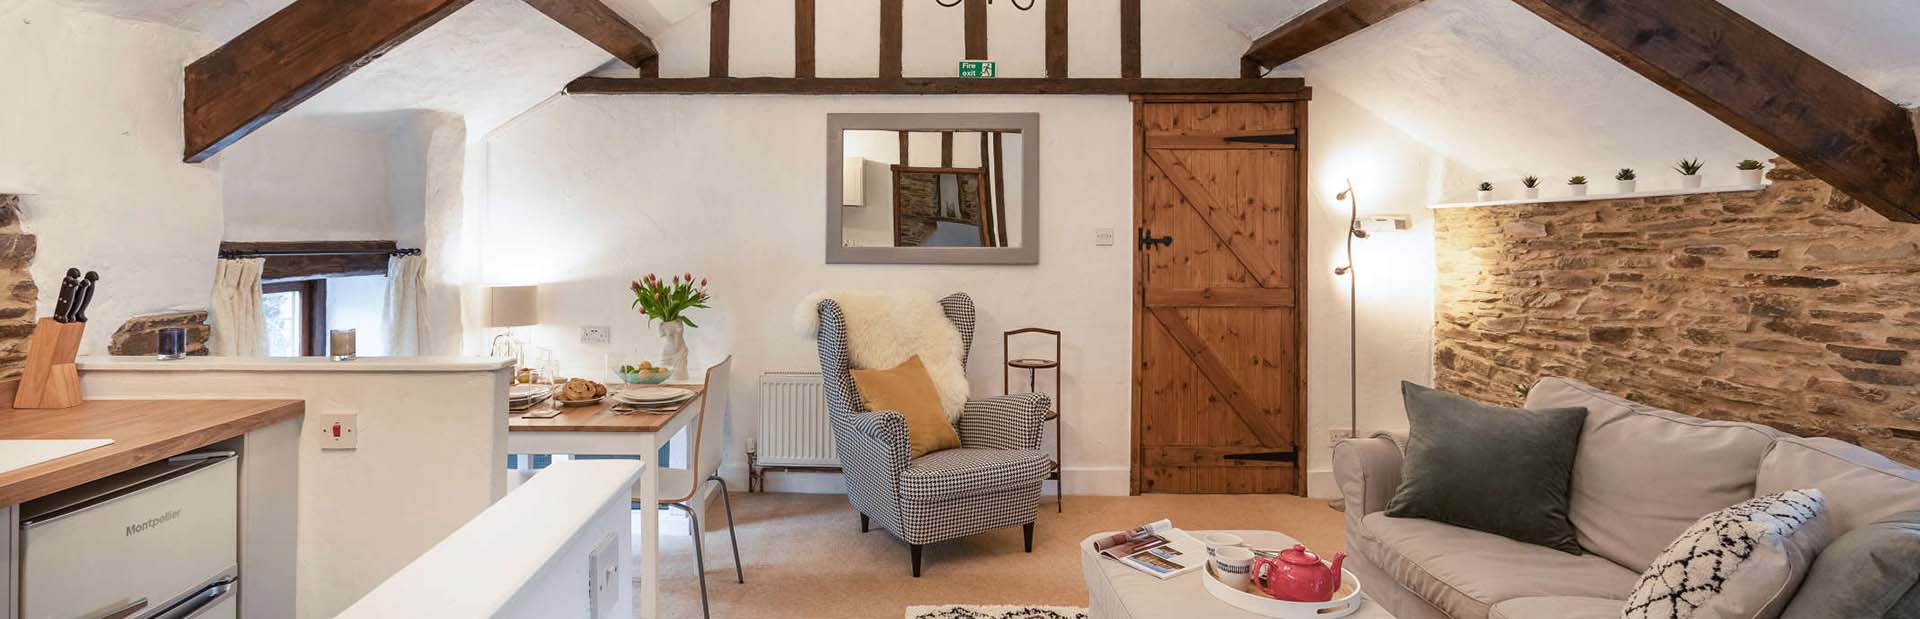 The Hayloft self-catering sitting room